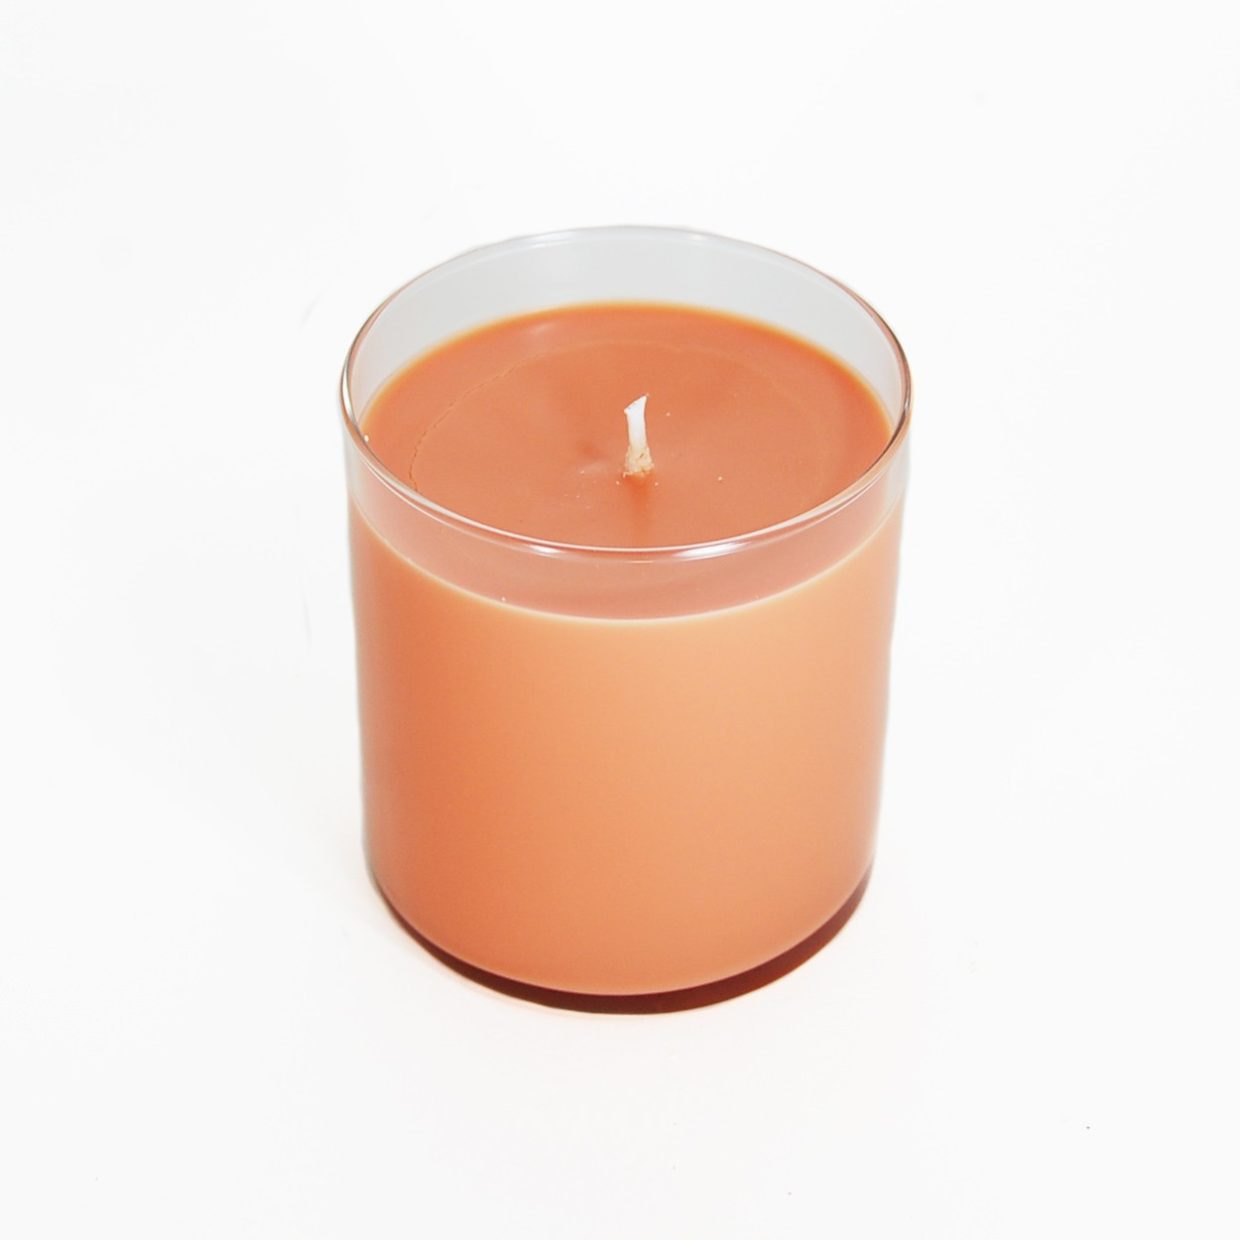 Container Candle Making Guide